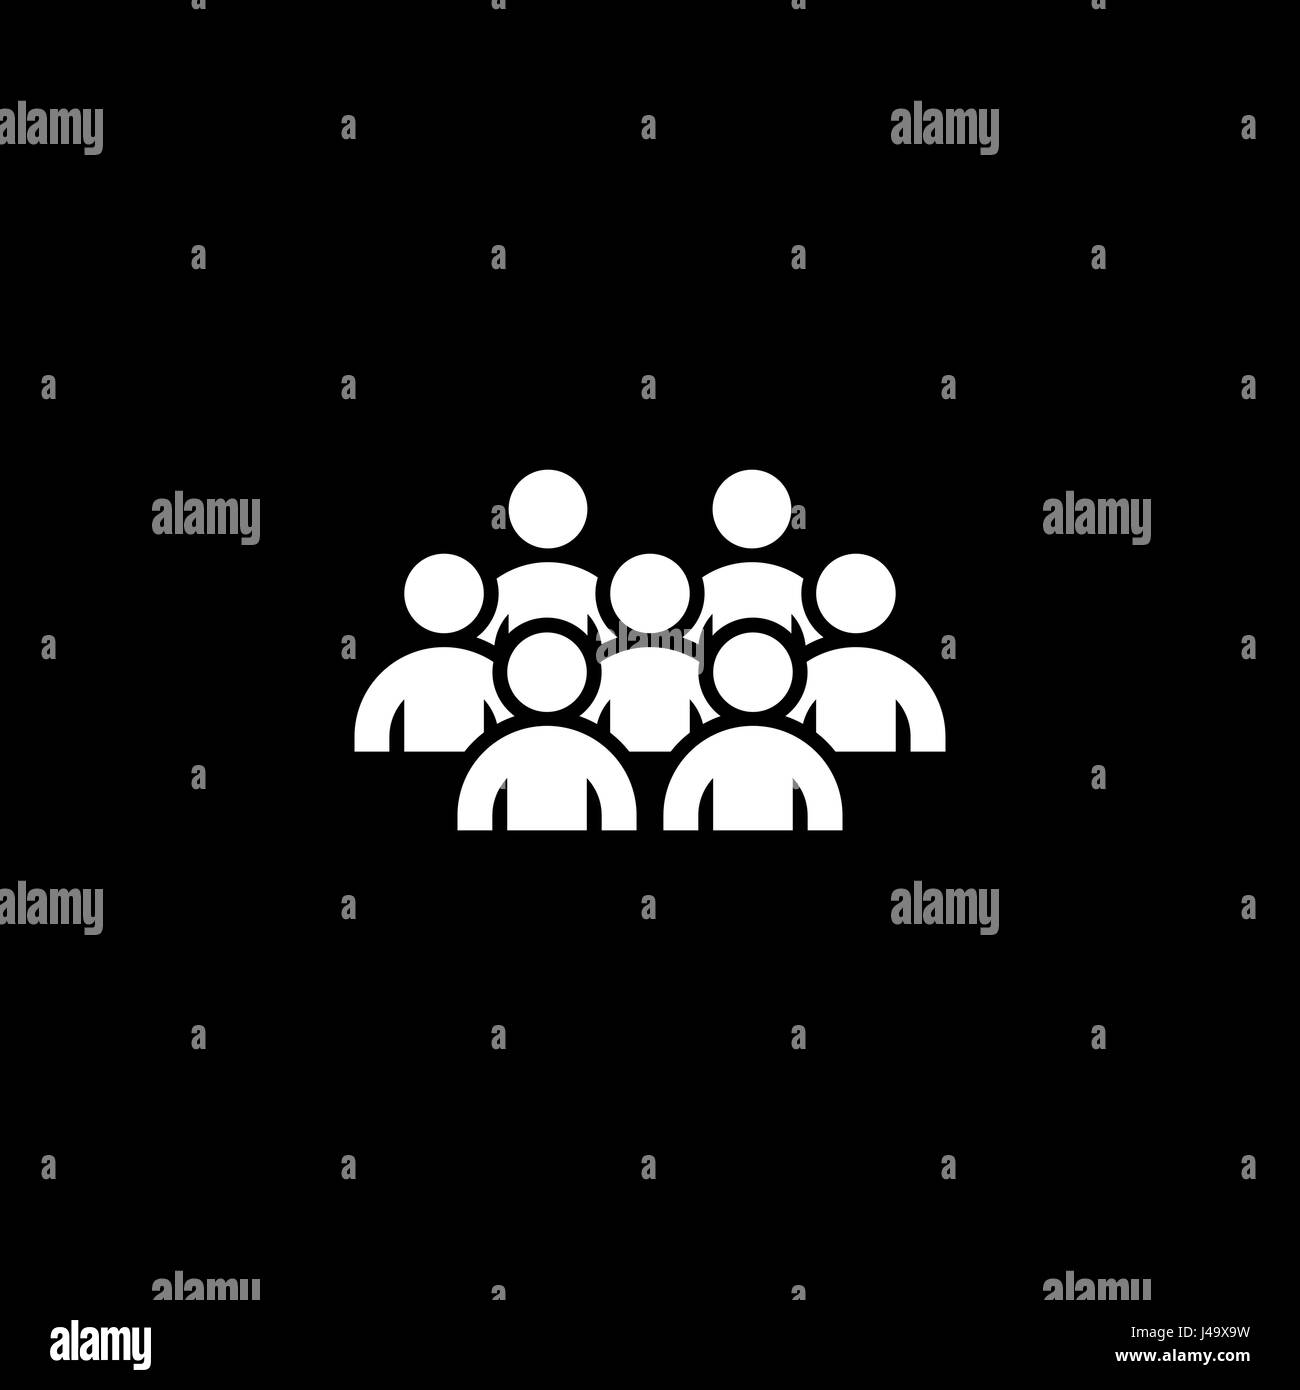 Group of People Icon. Business Concept. Flat Design. Stock Vector